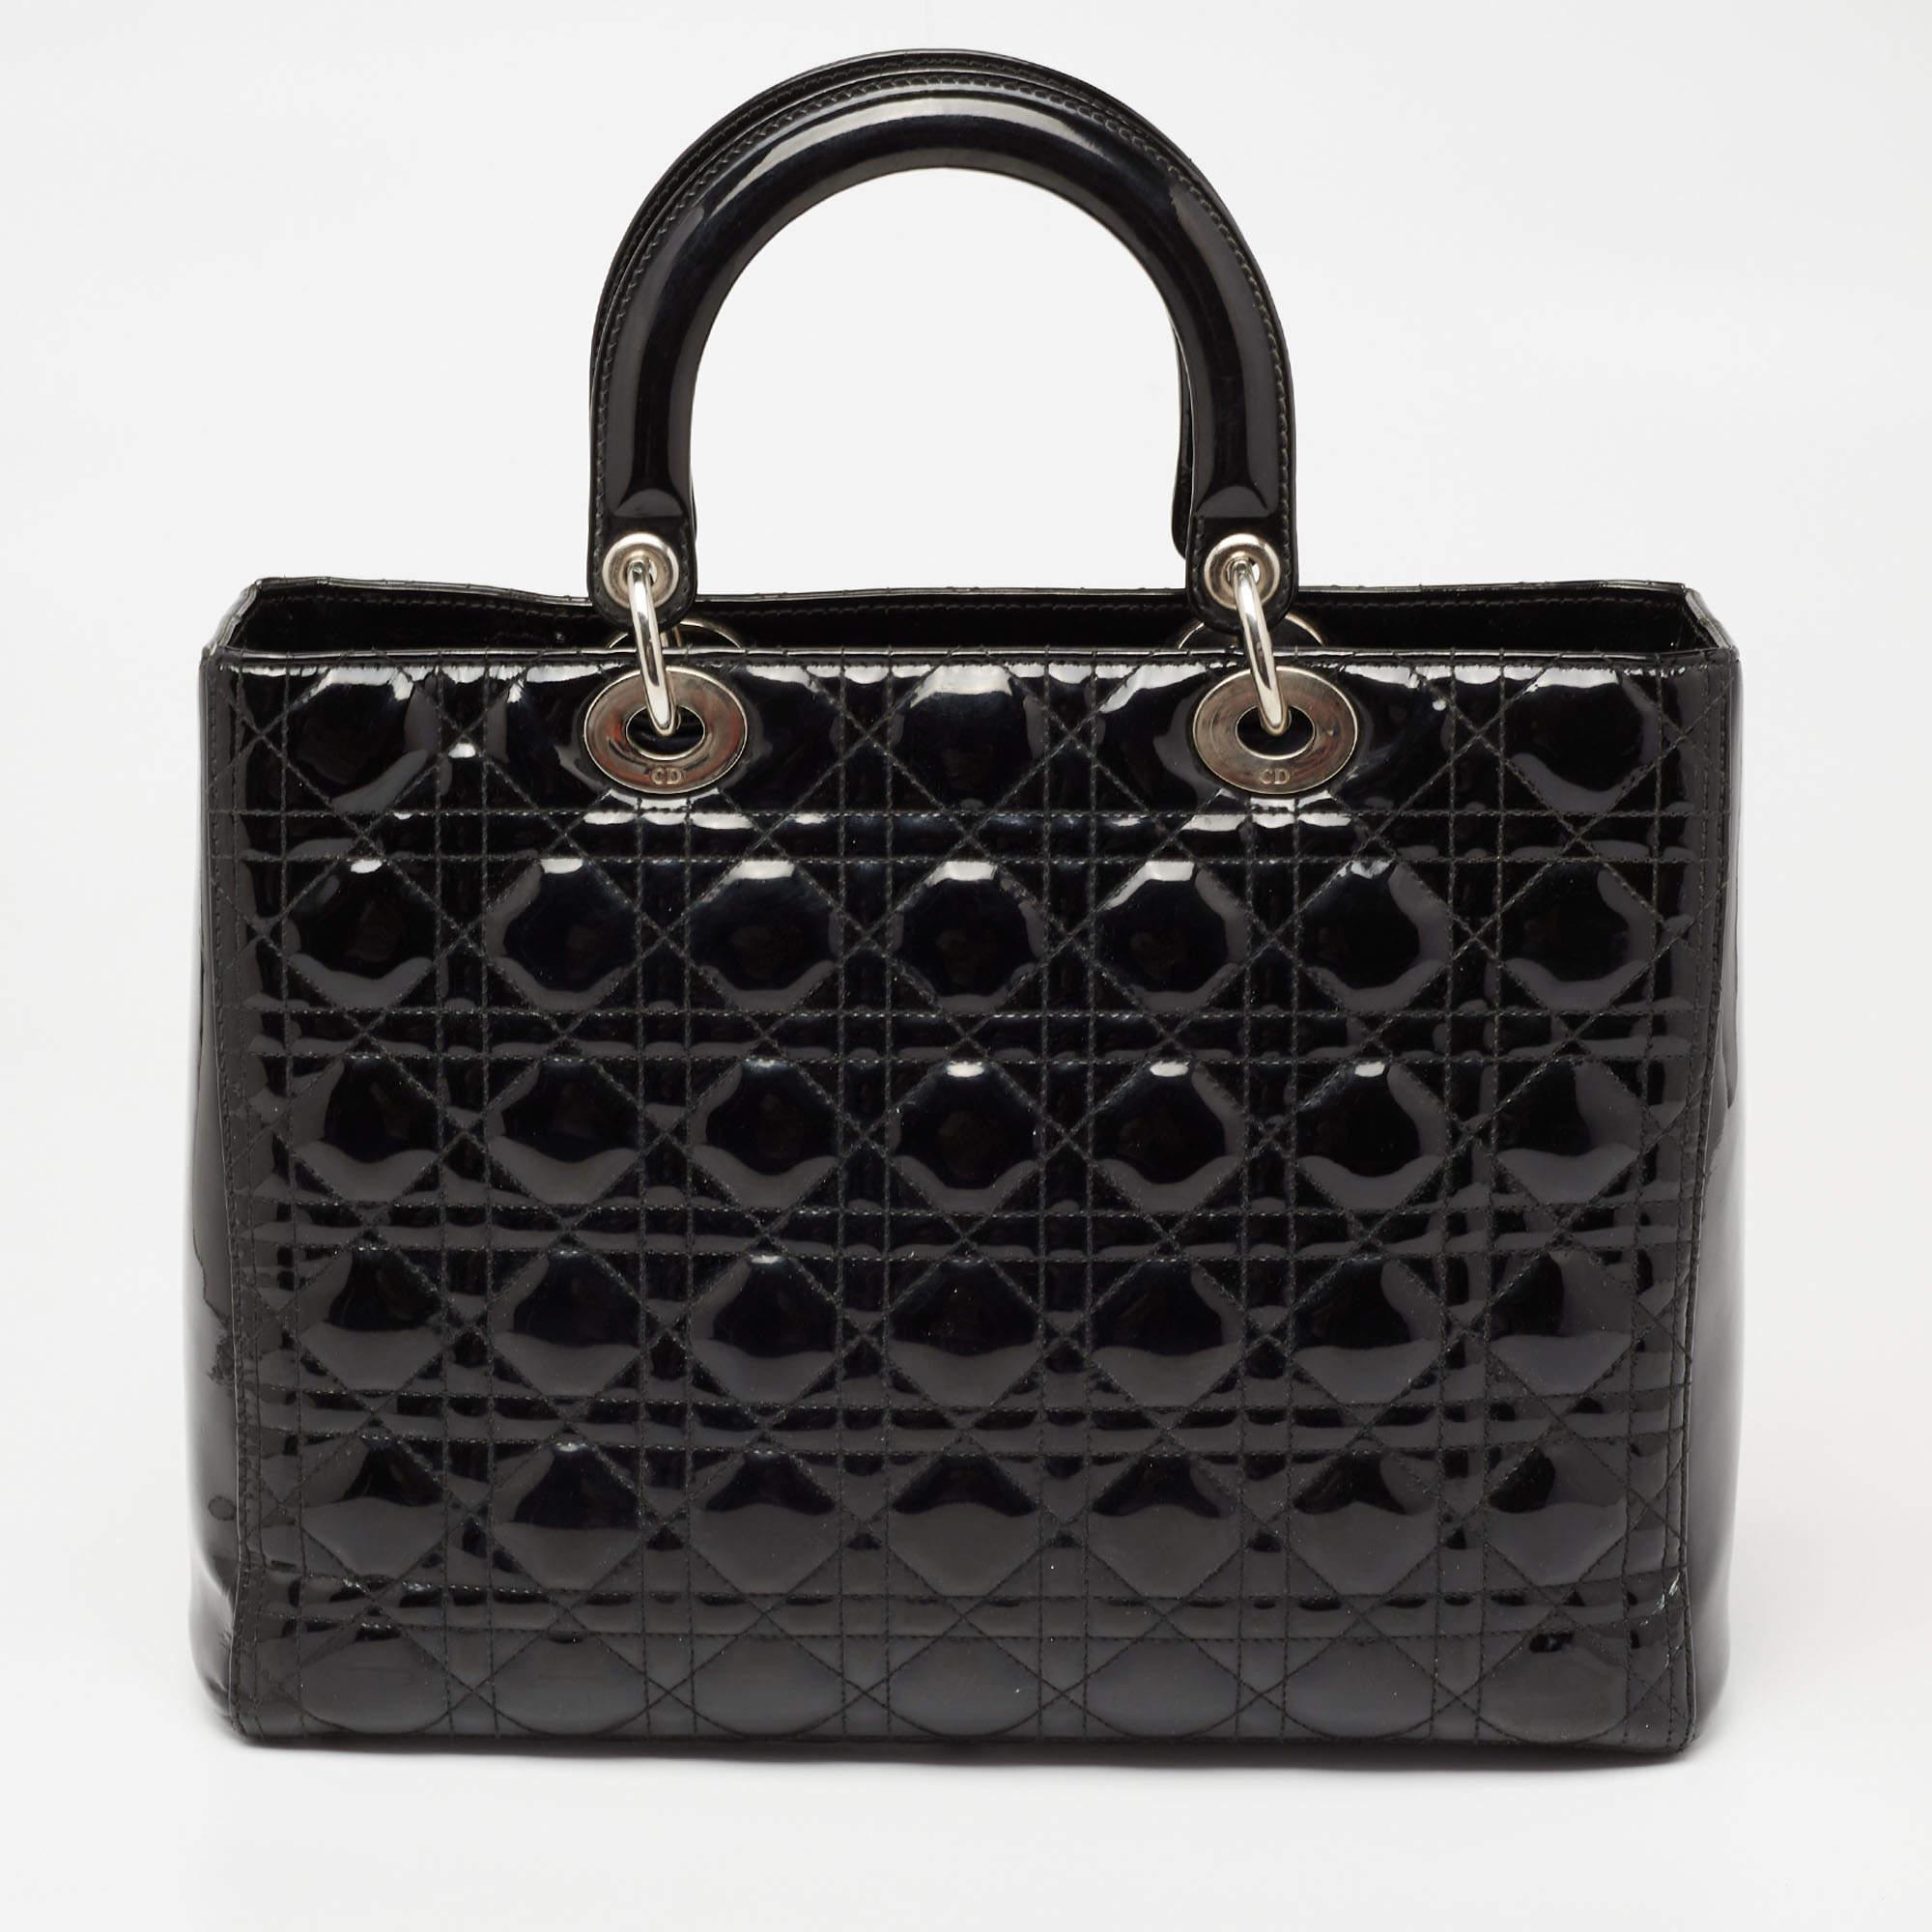 A timeless status and great design mark the Lady Dior tote. It is an iconic bag that people continue to invest in to this day. We have here this large Lady Dior tote crafted from black Cannage patent leather. The bag is complete with two top